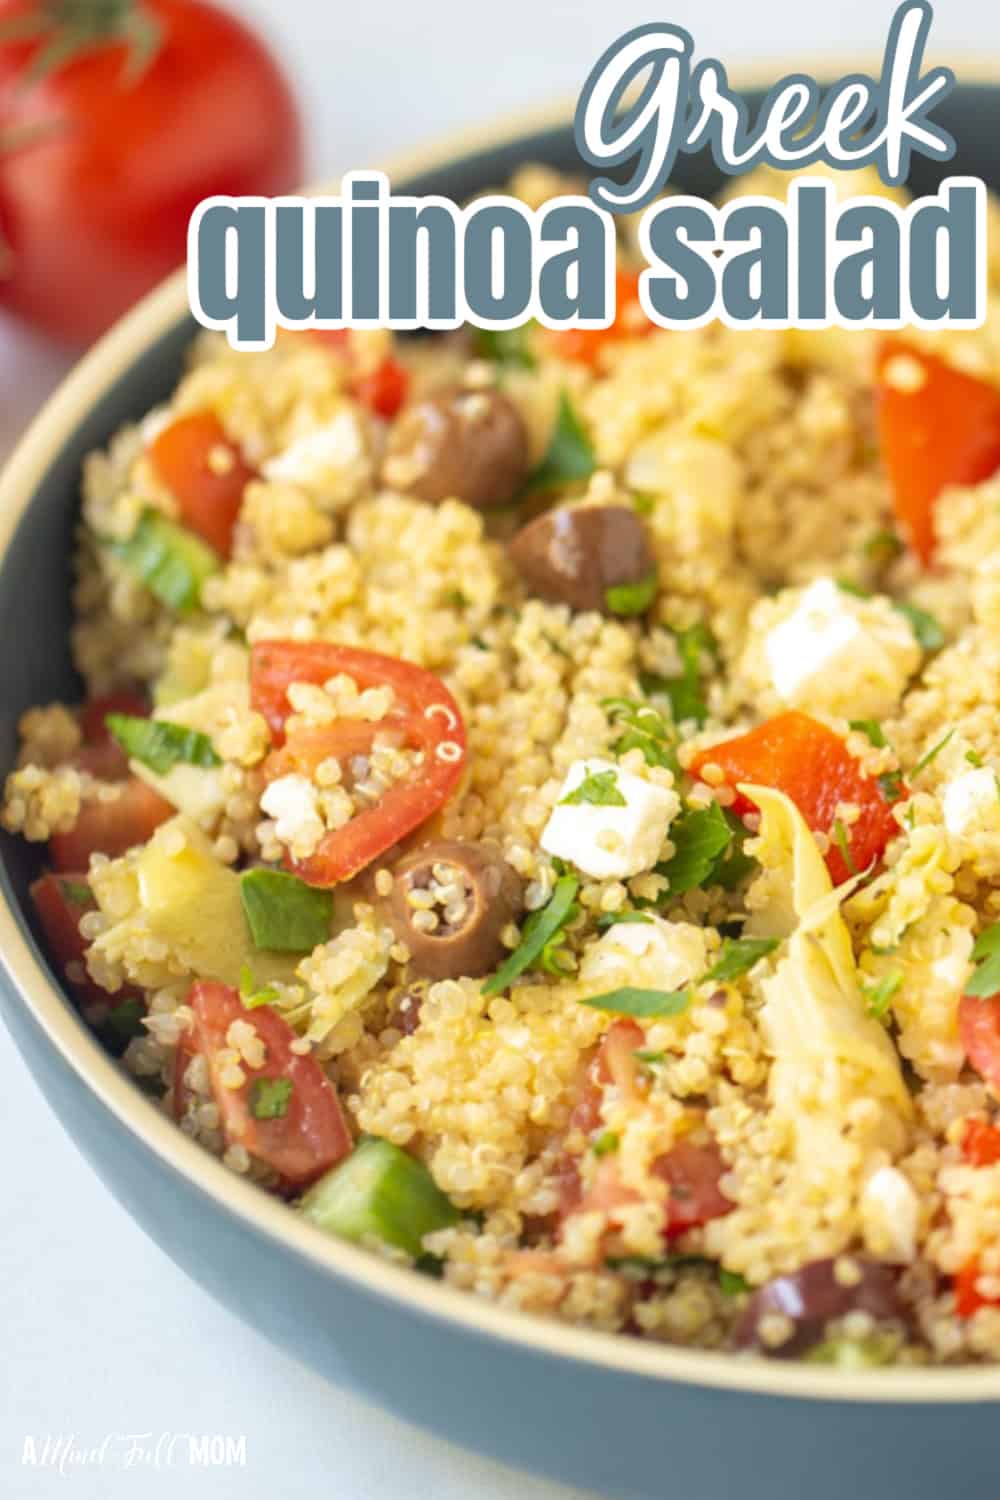 This healthy Greek Quinoa Salad, featuring fluffy quinoa that is dressed with Mediterranean flavors, is an easy-to-make, protein-packed, crowd-pleasing recipe! This gluten-free, healthy quinoa salad is perfect for potlucks, BBQs, or meal prep. 